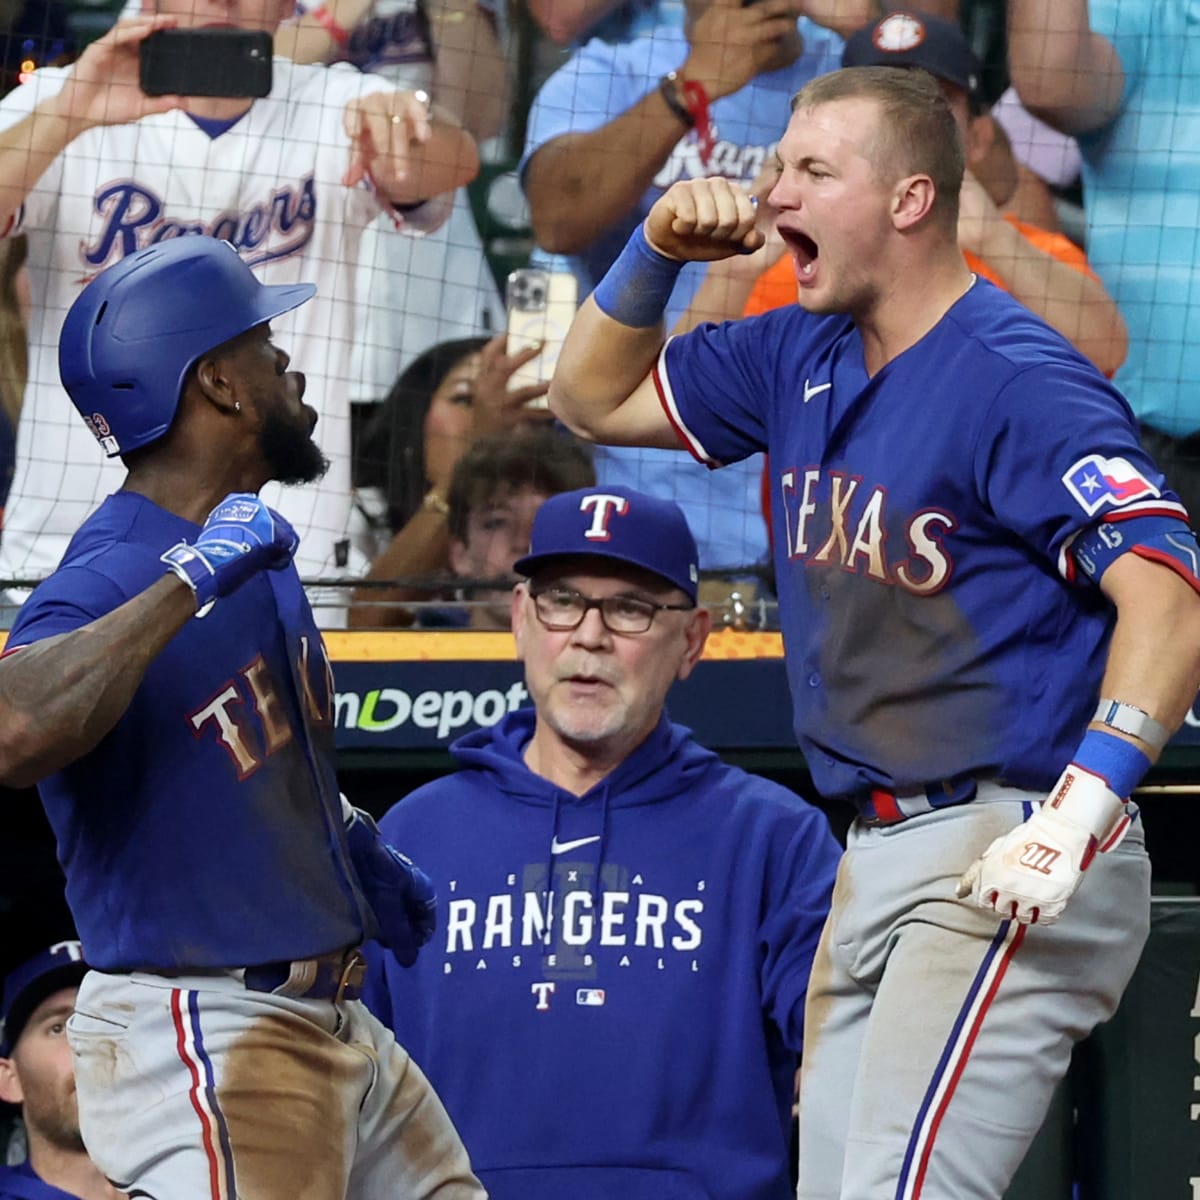 World Series: What Texas Rangers fans need to know before heading to Game 1  of the World Series